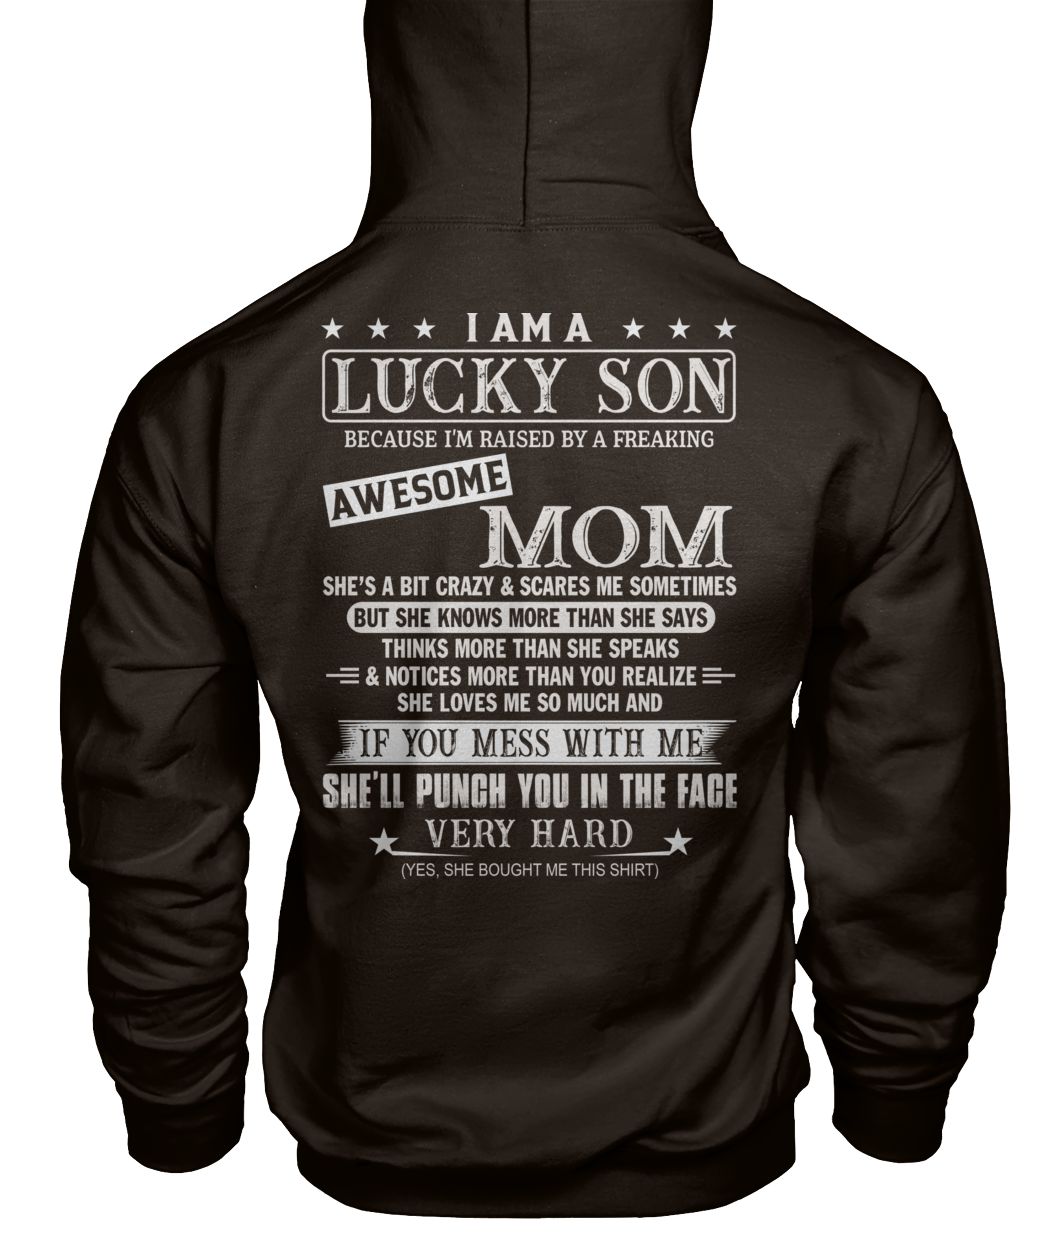 I am lucky son because I'm raised by a freaking awesome mom gildan hoodie